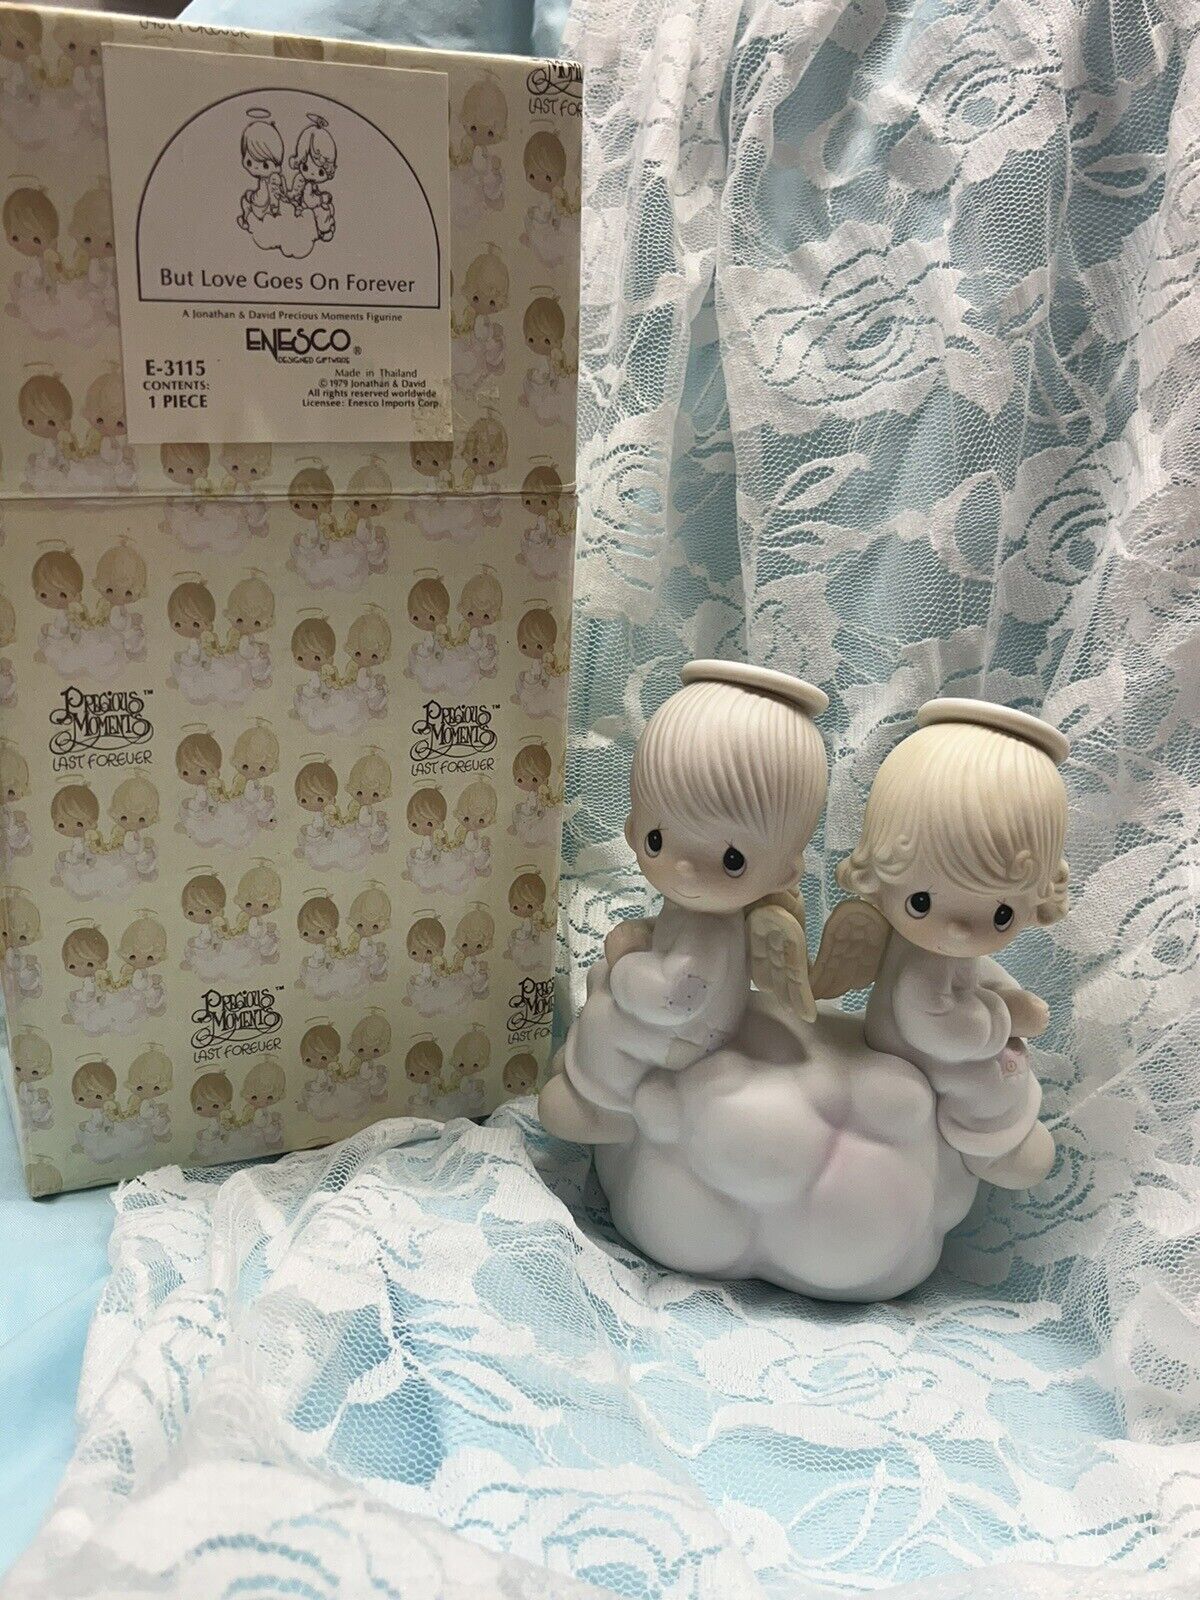 Precious Moments Figurine E3115 But Love Goes OnForever 1979 Two Angels On Cloud